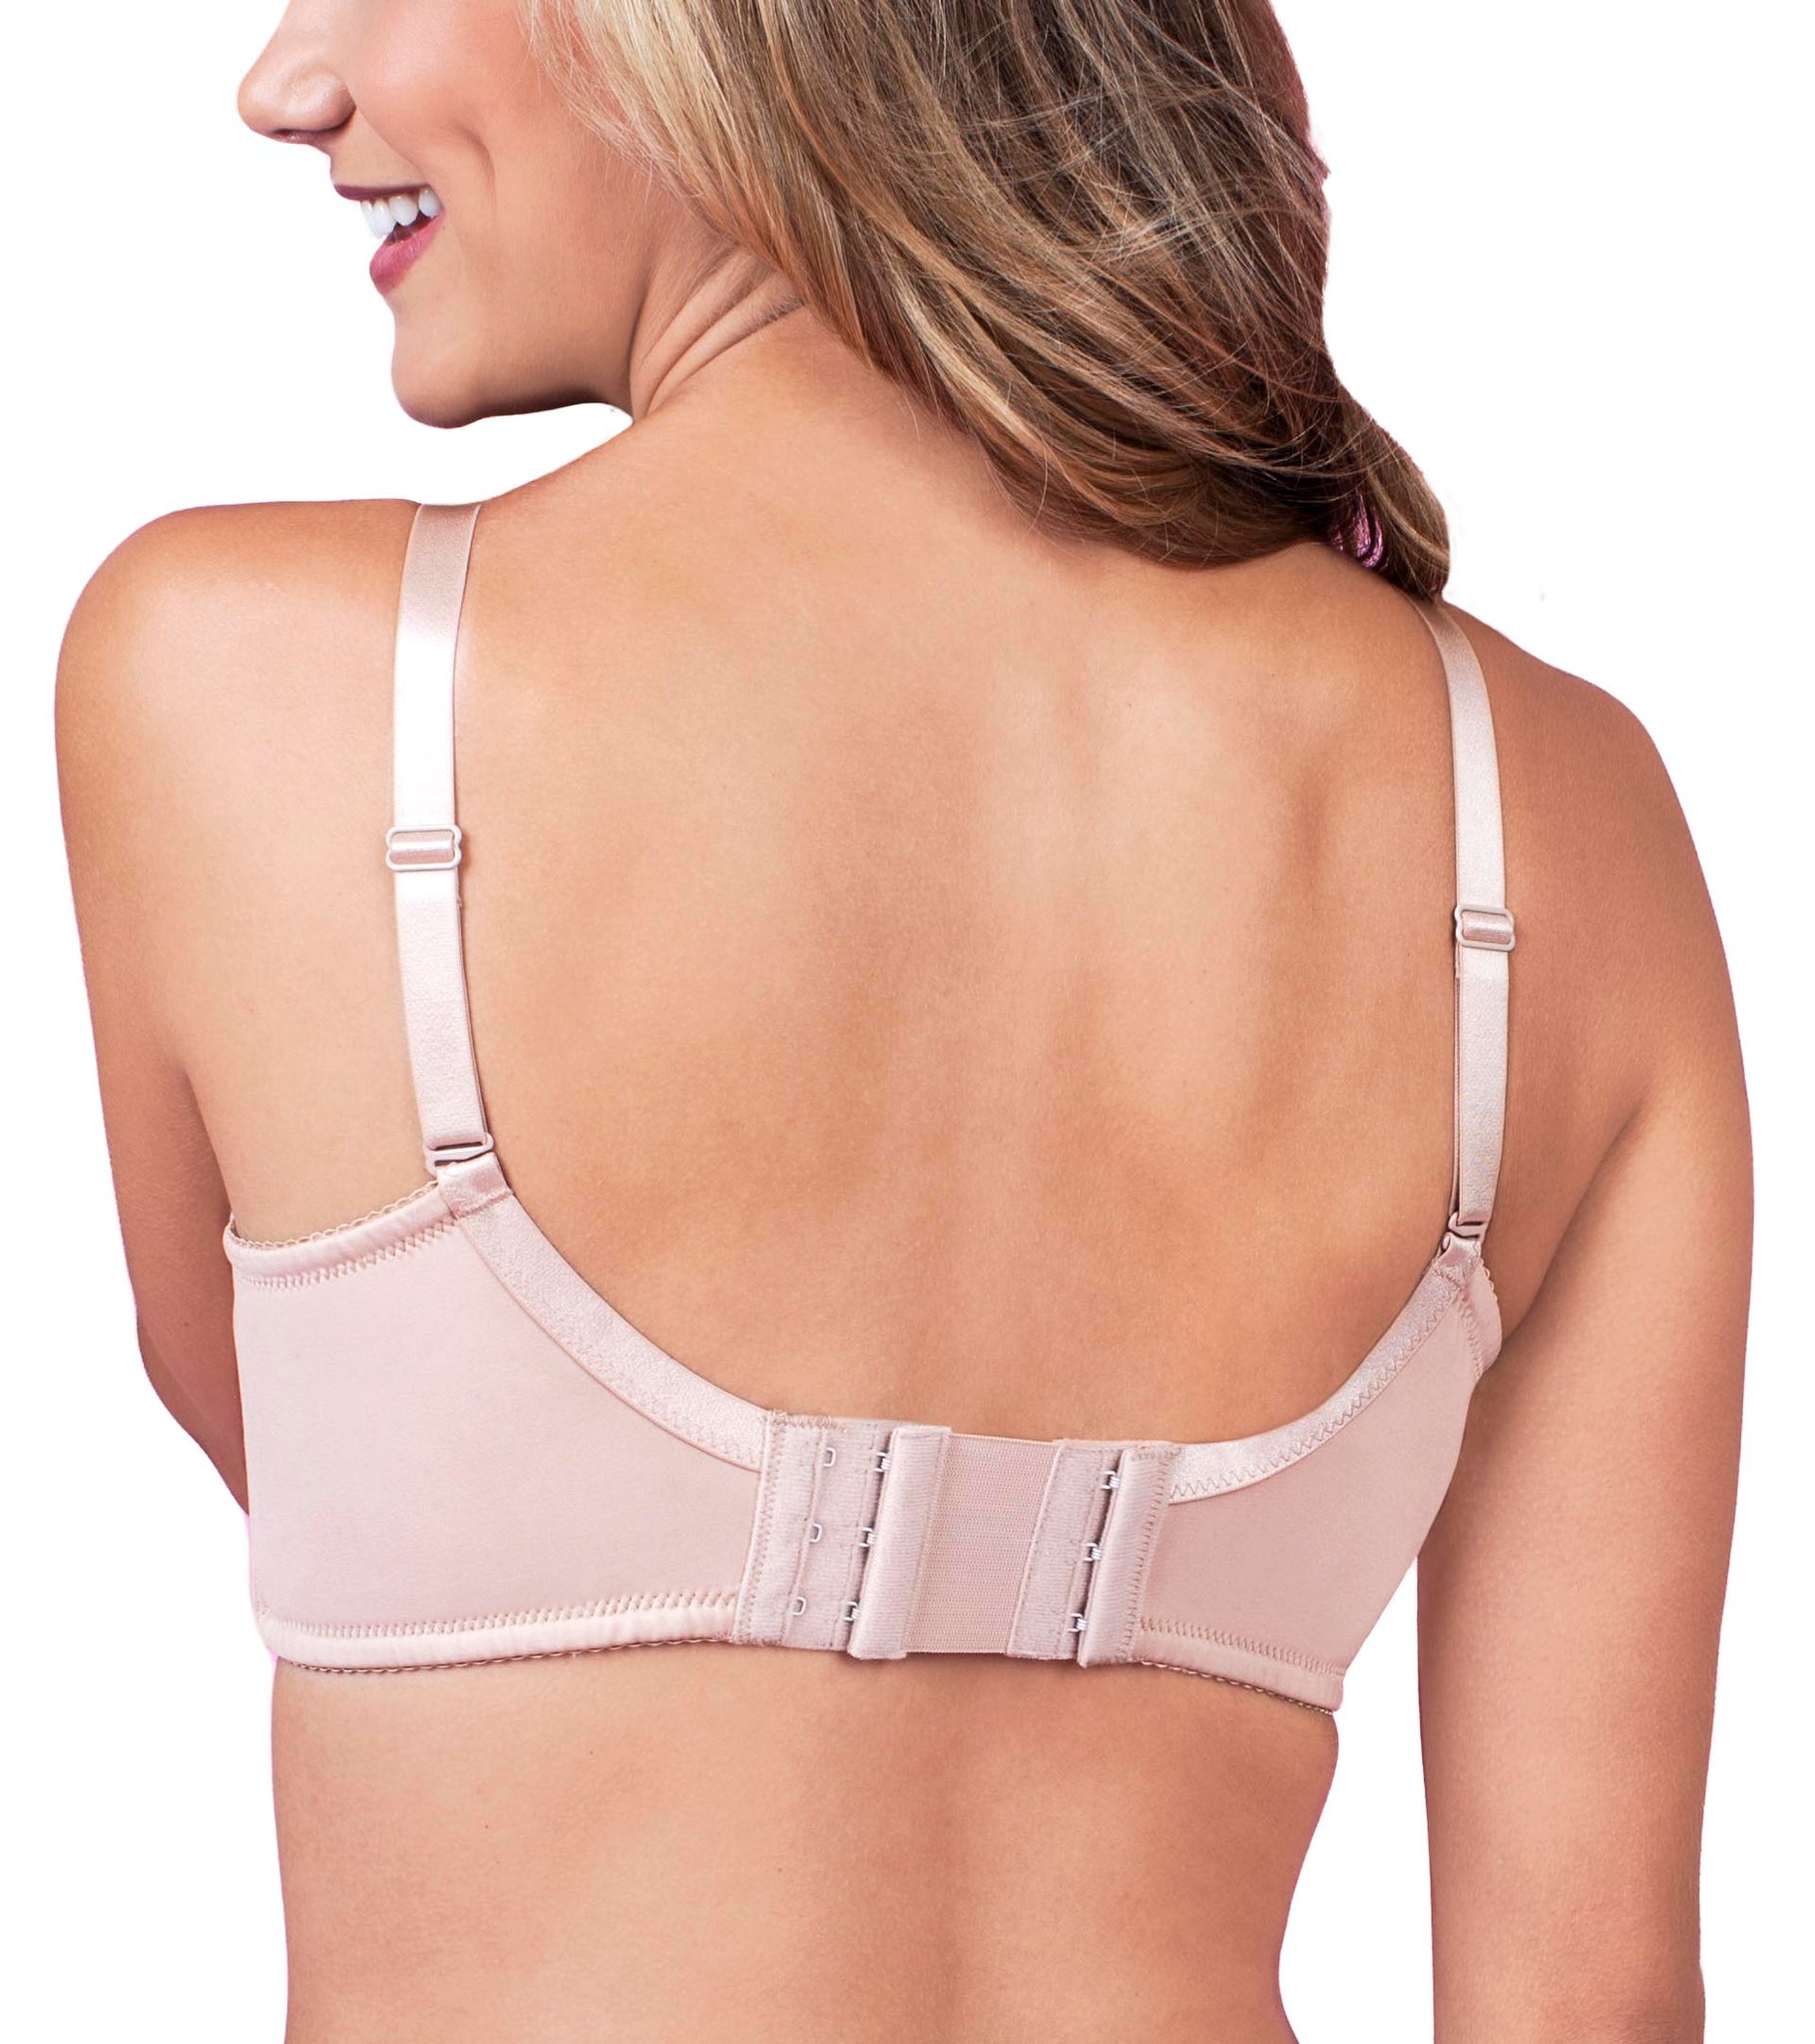 Bra Band Extenders – The Pencil Test